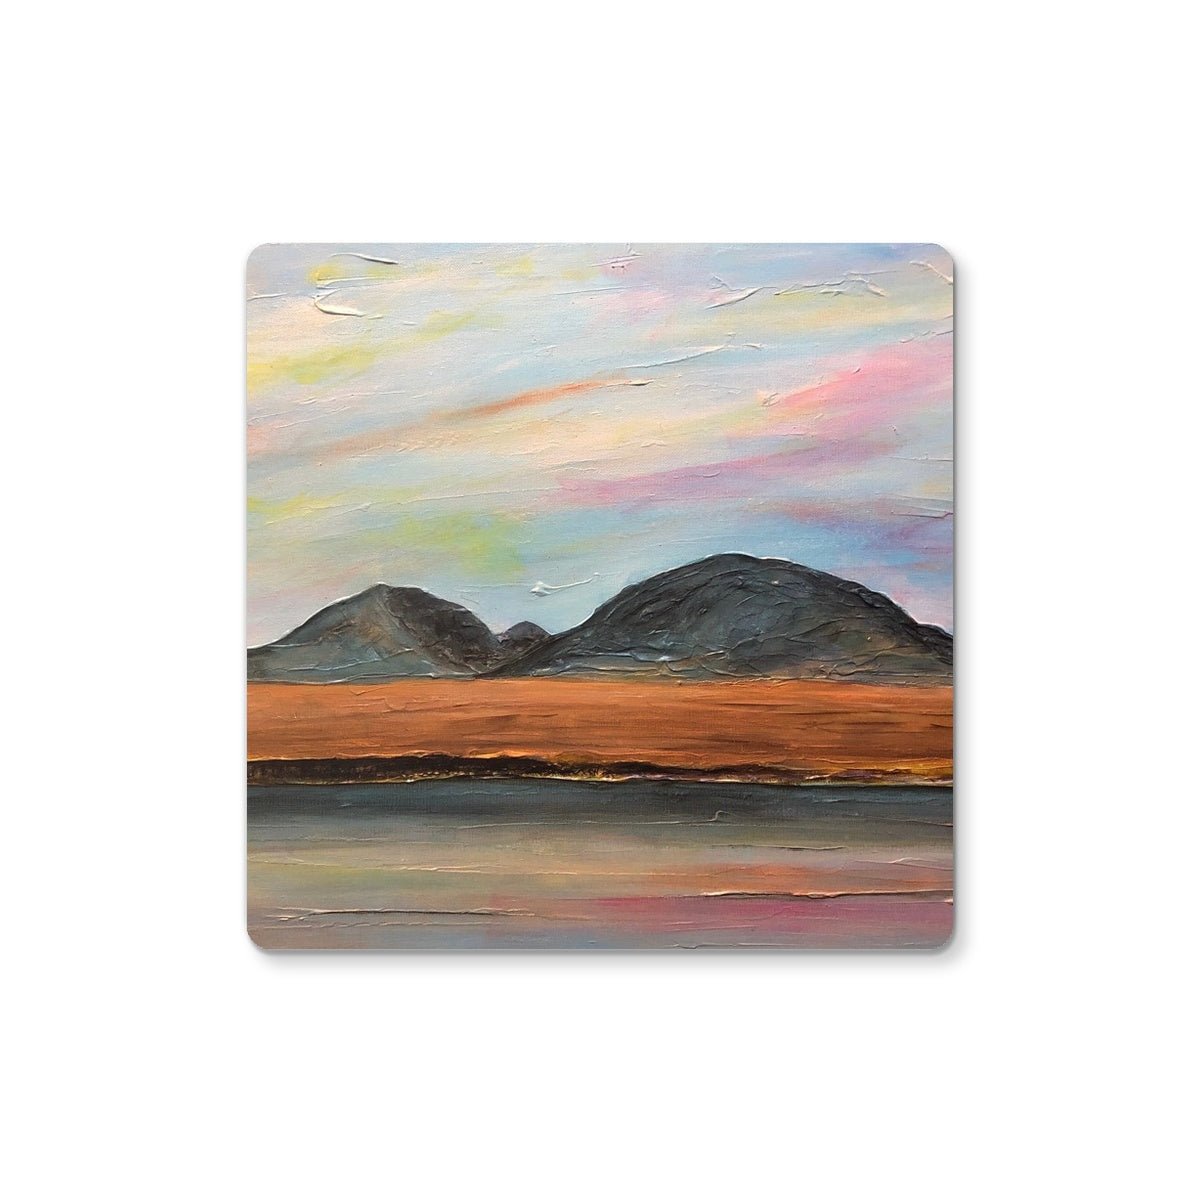 Jura Dawn Art Gifts Coaster-Coasters-Hebridean Islands Art Gallery-6 Coasters-Paintings, Prints, Homeware, Art Gifts From Scotland By Scottish Artist Kevin Hunter